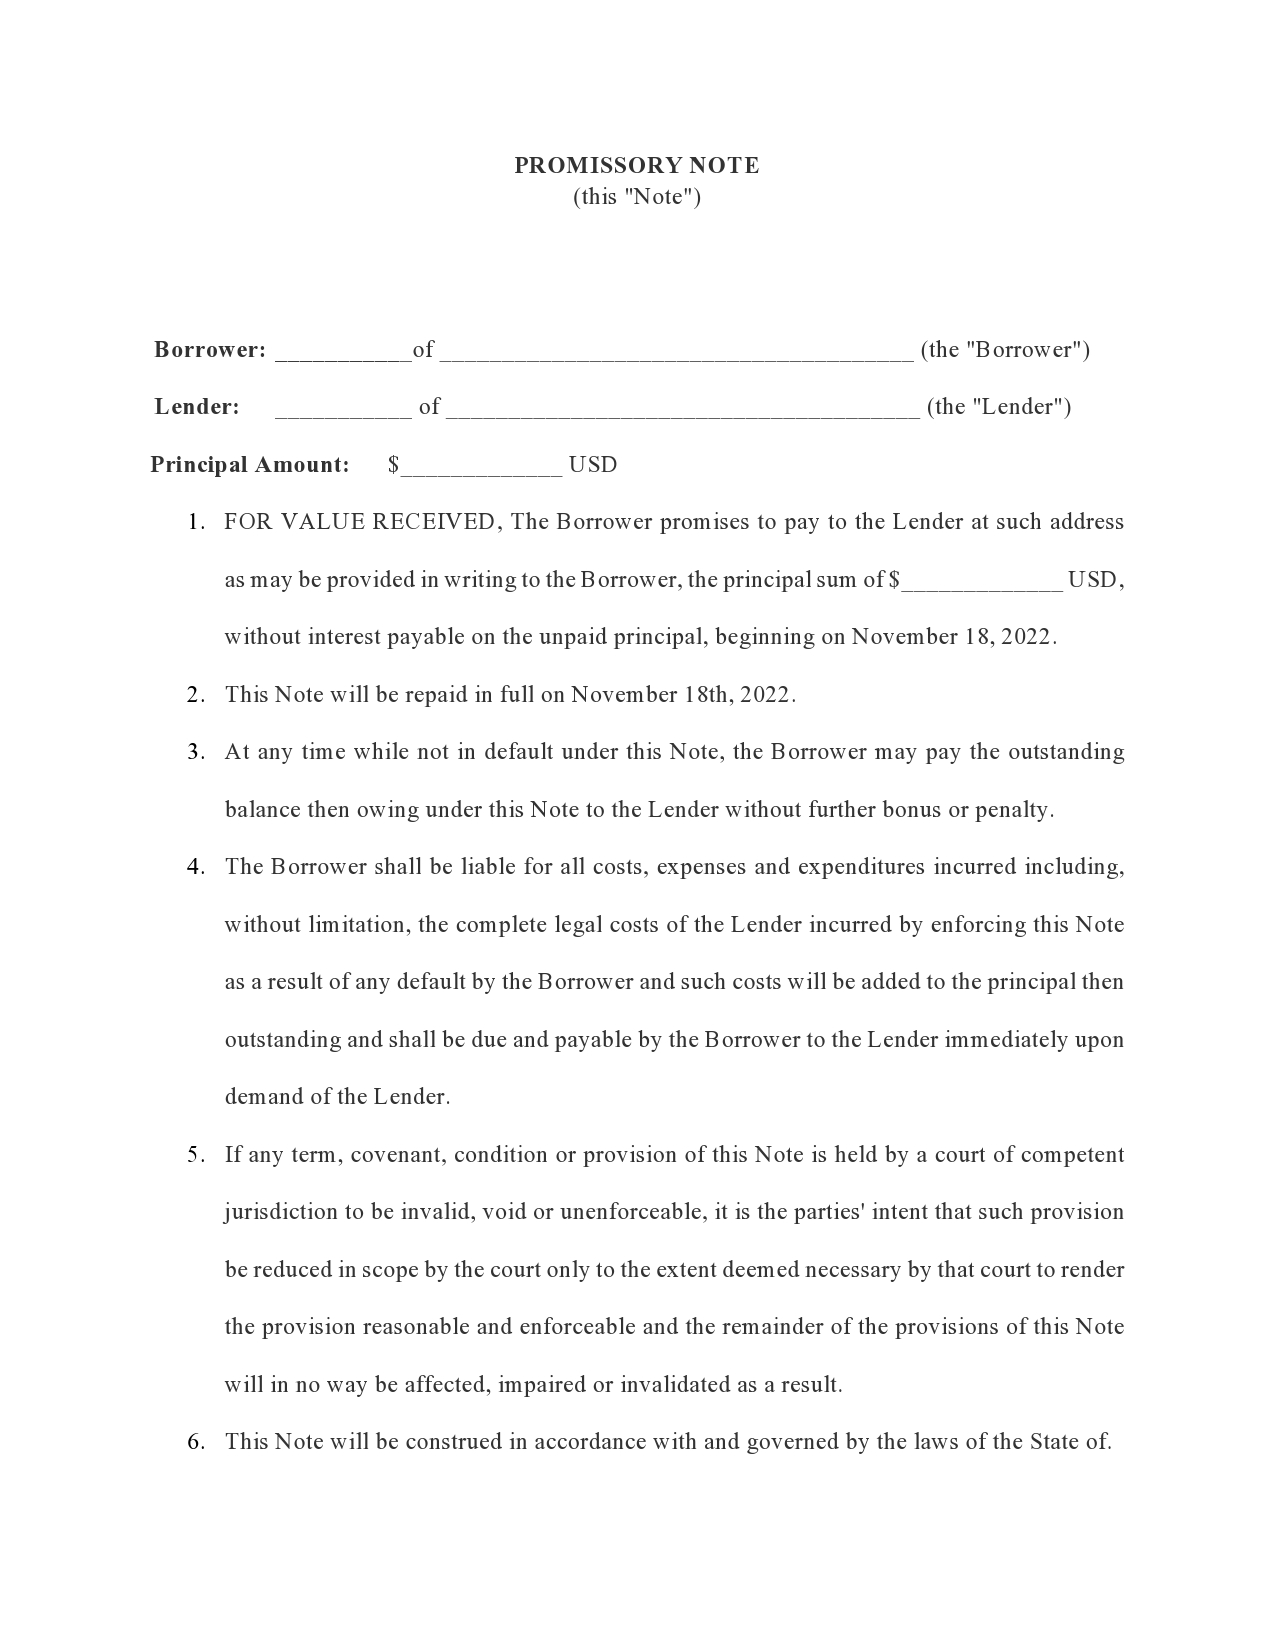 Free promissory note template 04